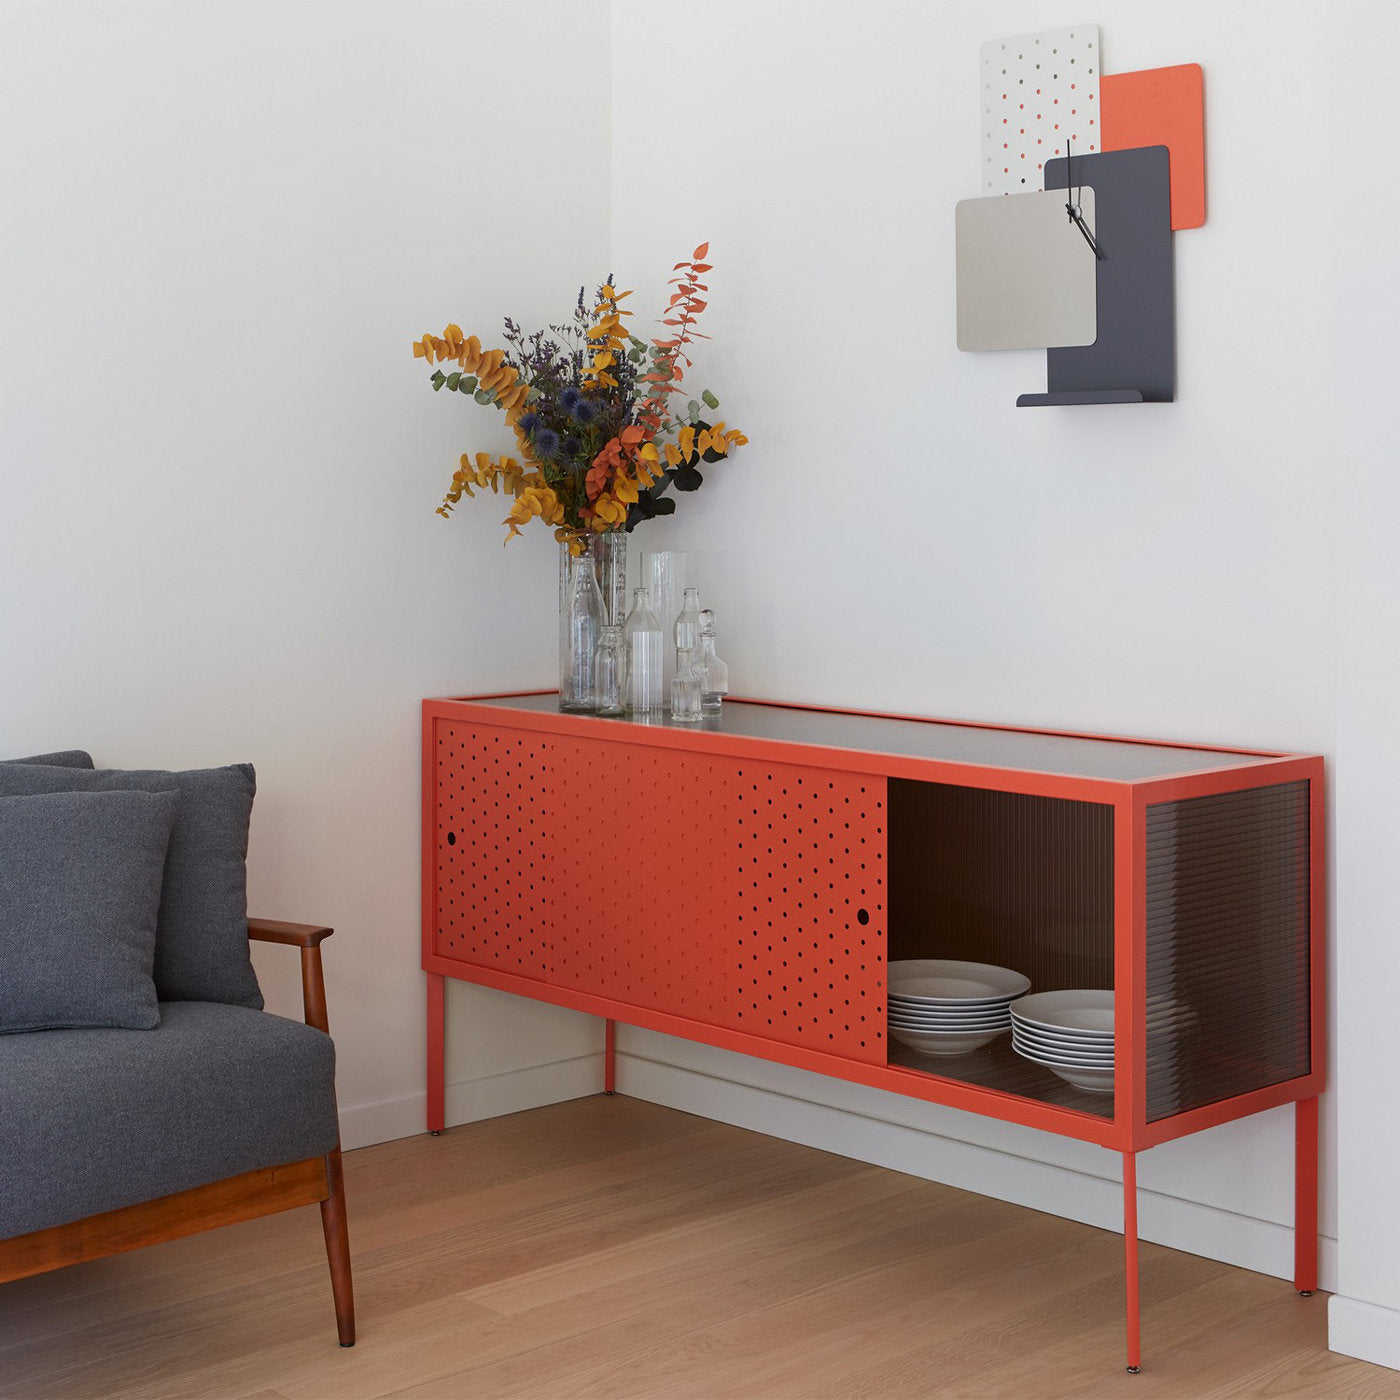 Maia Melon Sideboard by Michele Giacopini & MM Company  - Alternative view 2